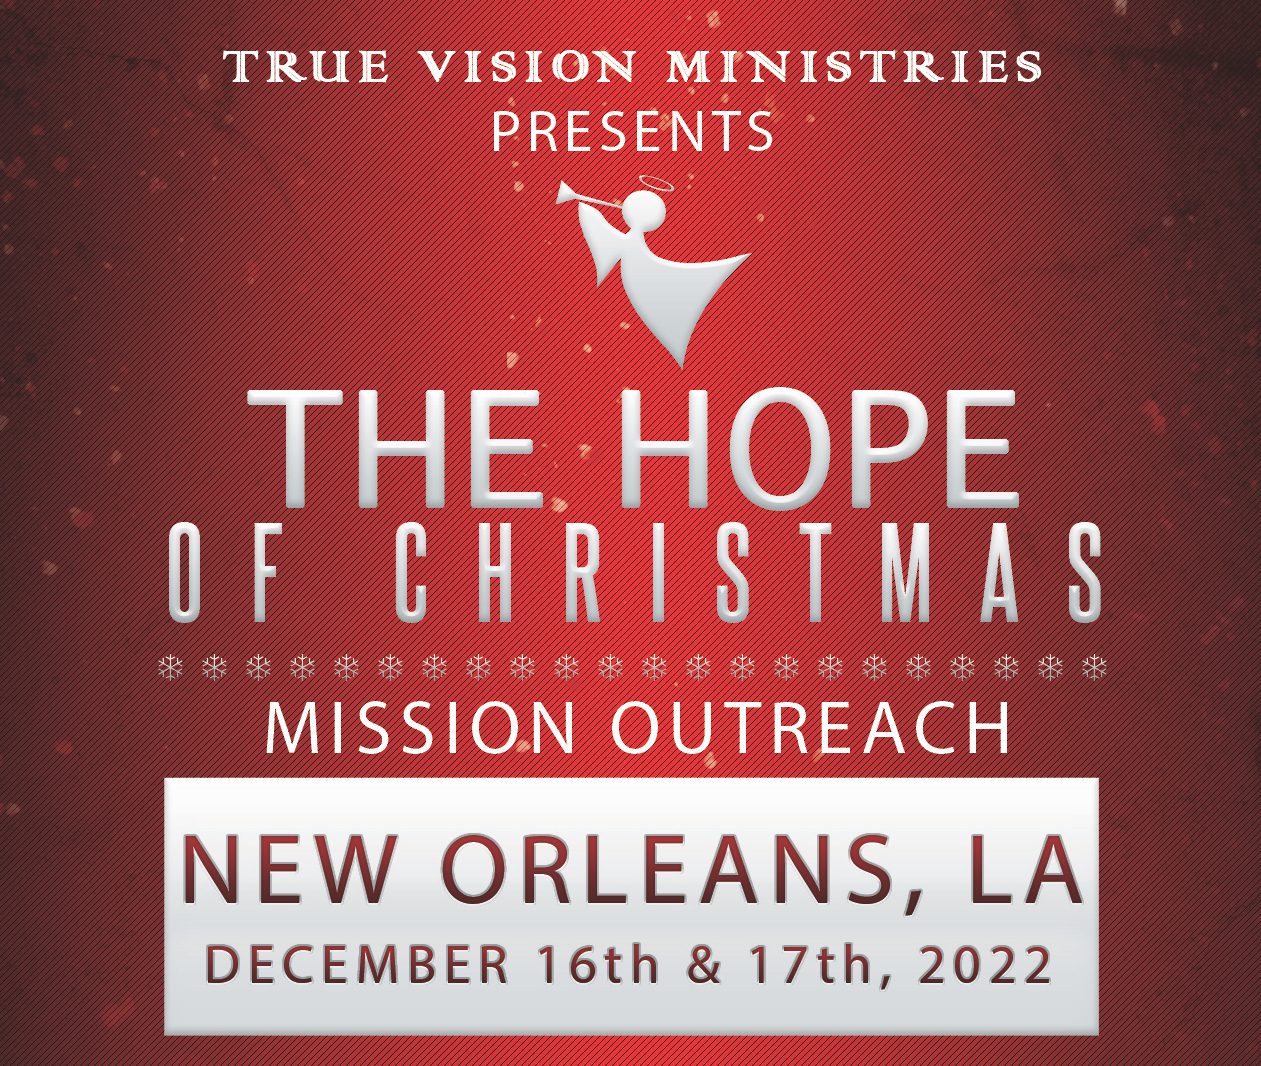 NOLA Mission - The Hope of Christmas